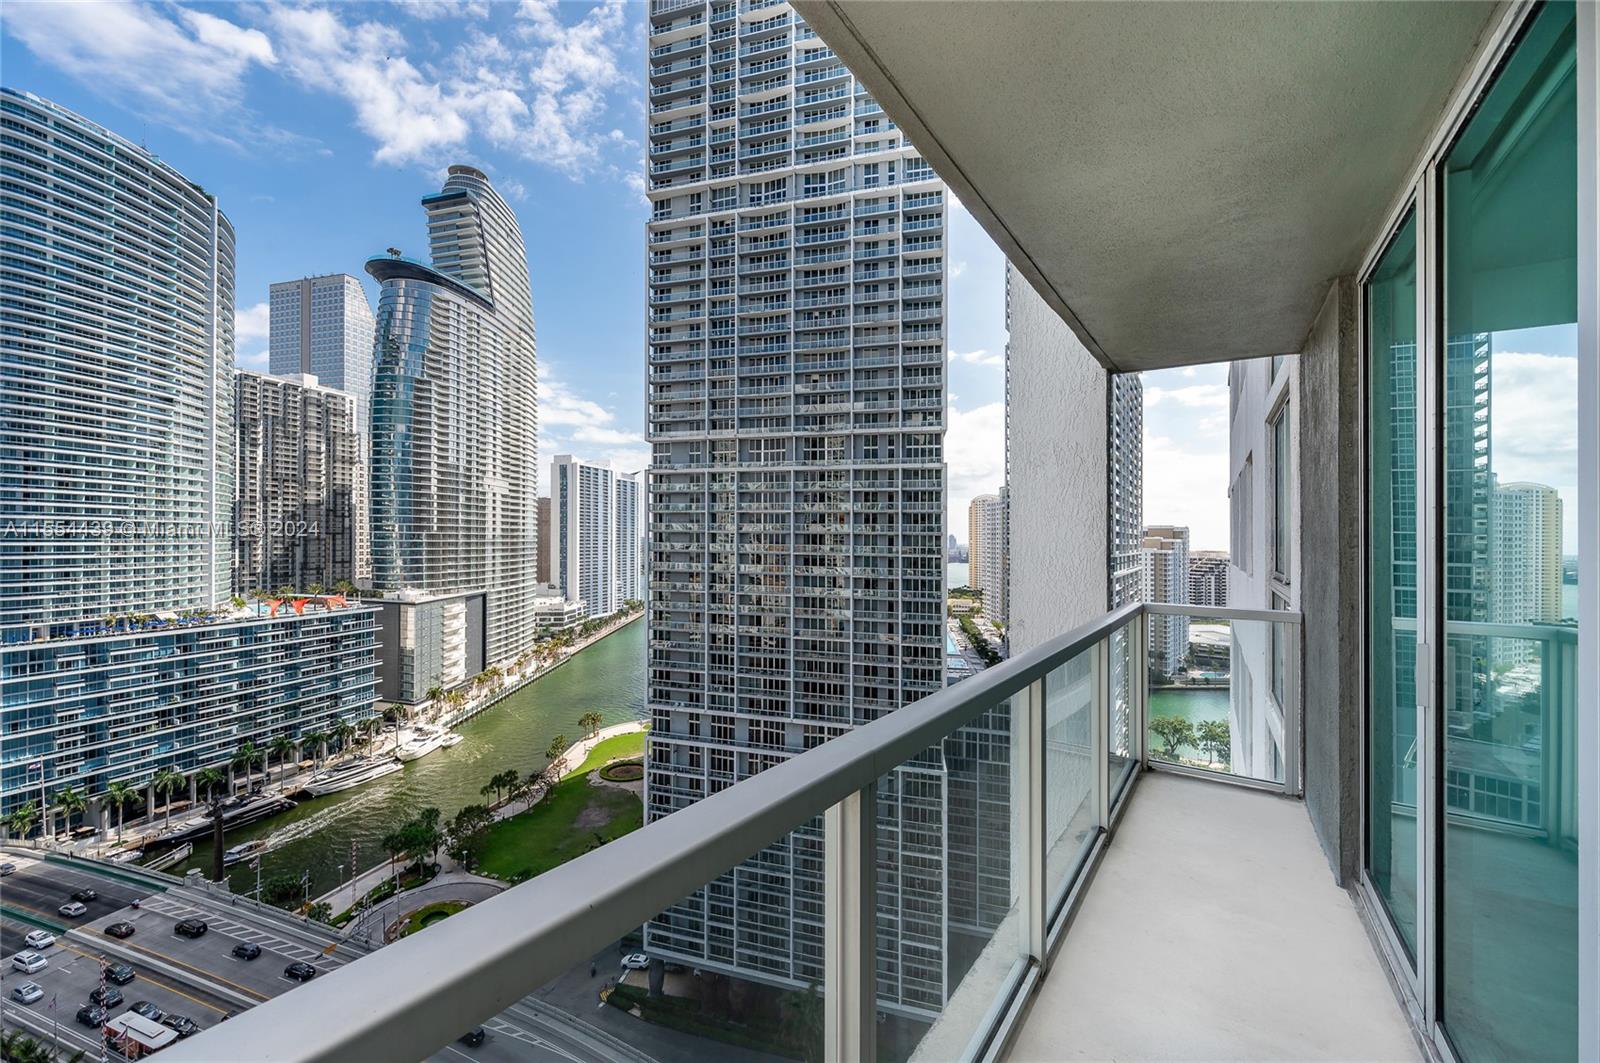 Experience luxury living in the heart of Brickell with this stunning 1-bedroom, 1-bathroom unit spanning 754 square feet. Inside this freshly painted unit, enjoy modern touches, an open-concept living area, and a sleek kitchen. Step onto the spacious balcony for stunning bay and city views, perfect for unwinding.

The building offers 24-hour concierge, 24-hour valet parking, a heated rooftop pool and sundeck, a separate 11th-floor pool and sundeck with poolside cabanas, a state-of-the-art fitness center, sauna and steam rooms, a sports room with billiards table and kitchen, wine cellar, club room, and theater room.